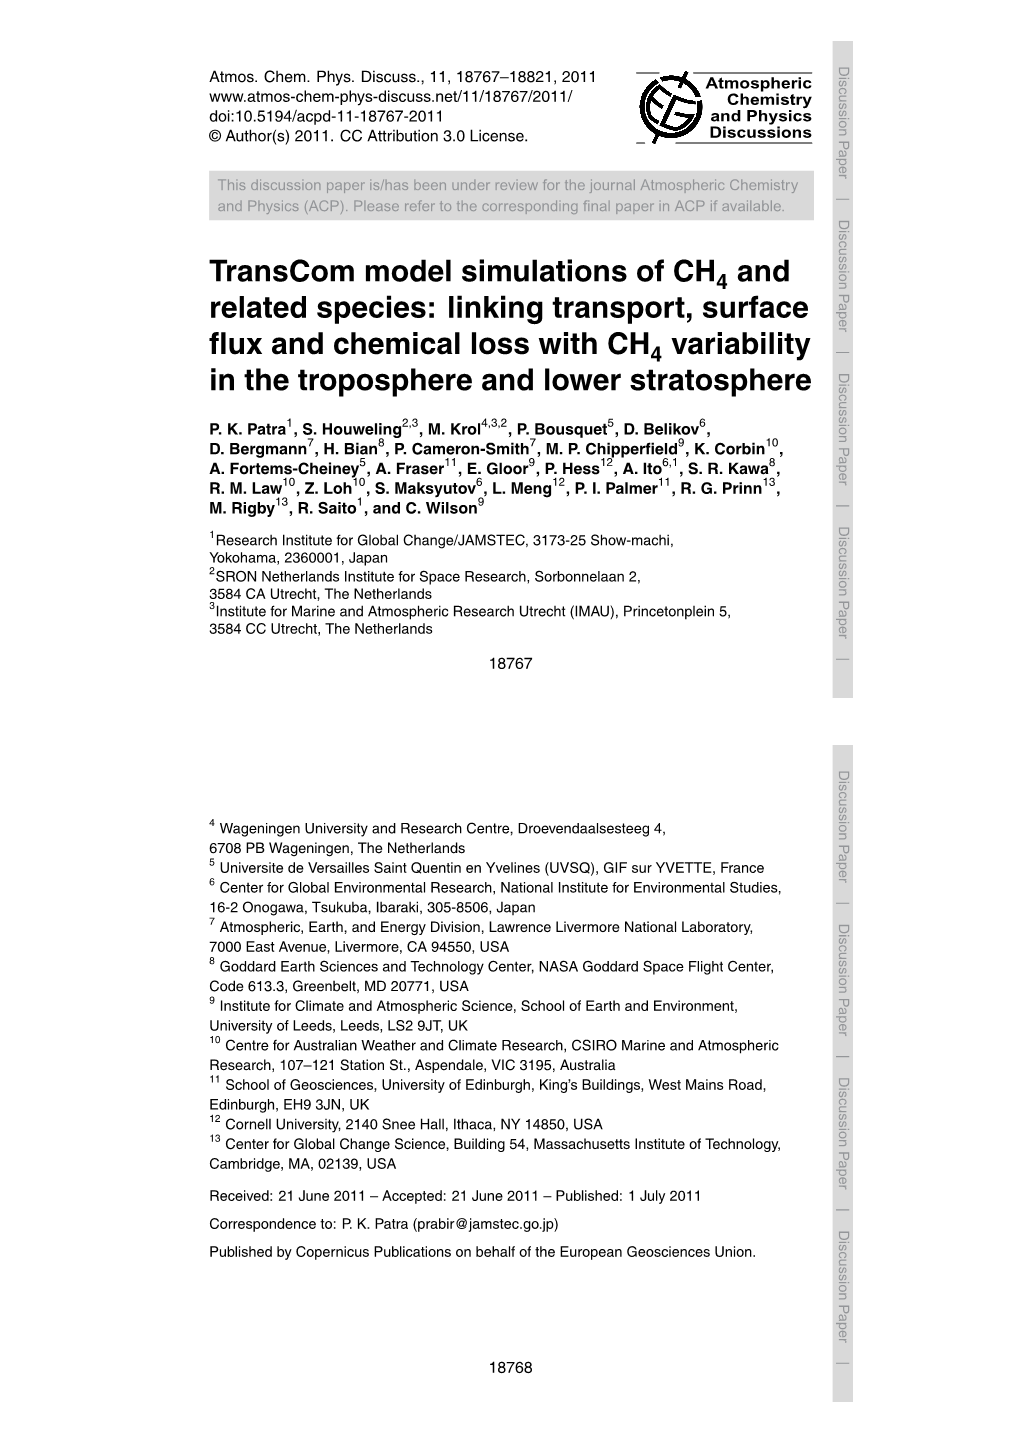 Linking Transport, Surface Flux and Chemical Loss with CH Variability in T